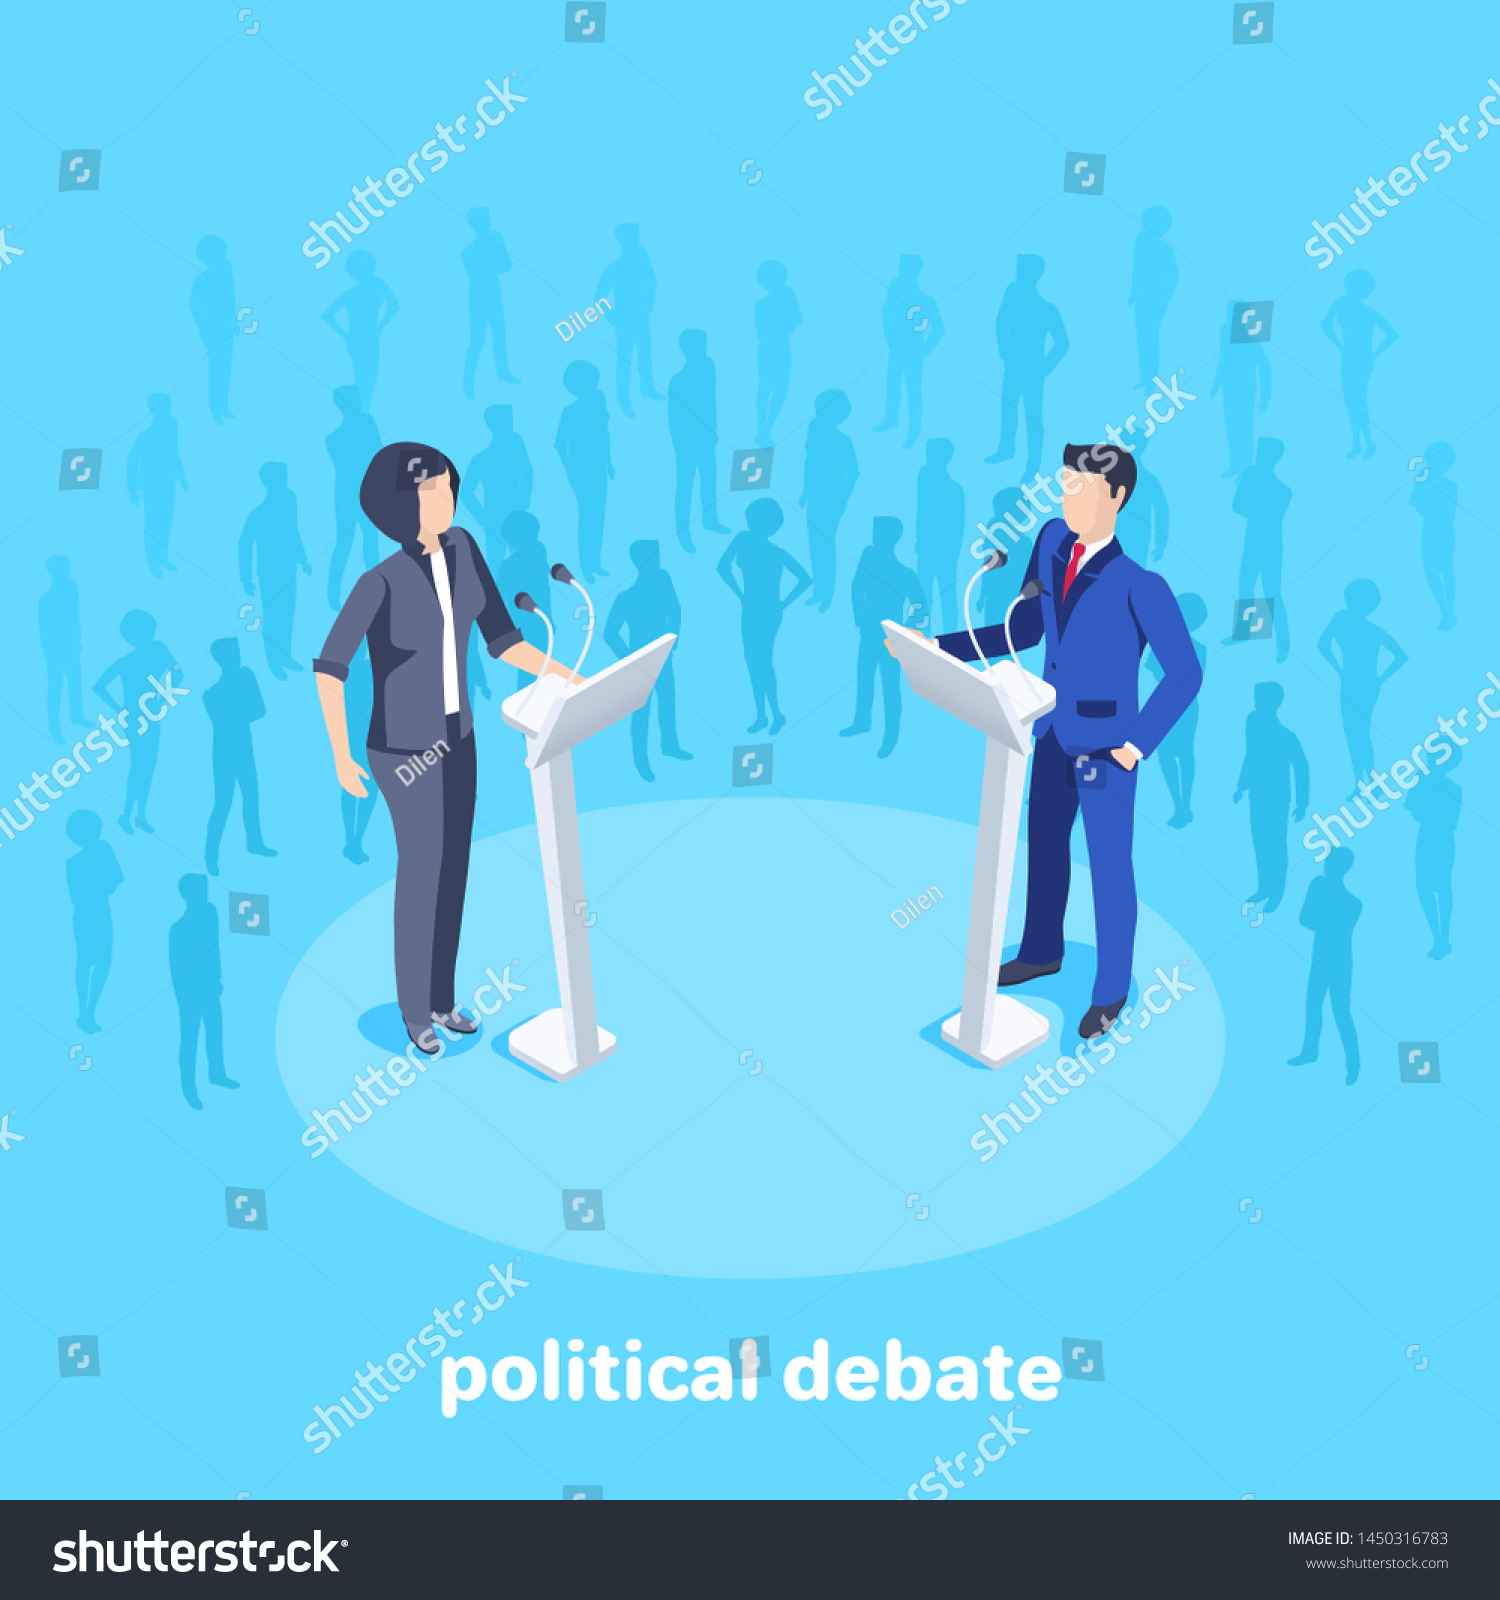 SVG of Isometric vector image on a blue background, woman in business suits stand in front of a microphone on the stage among the spectators, political debates svg